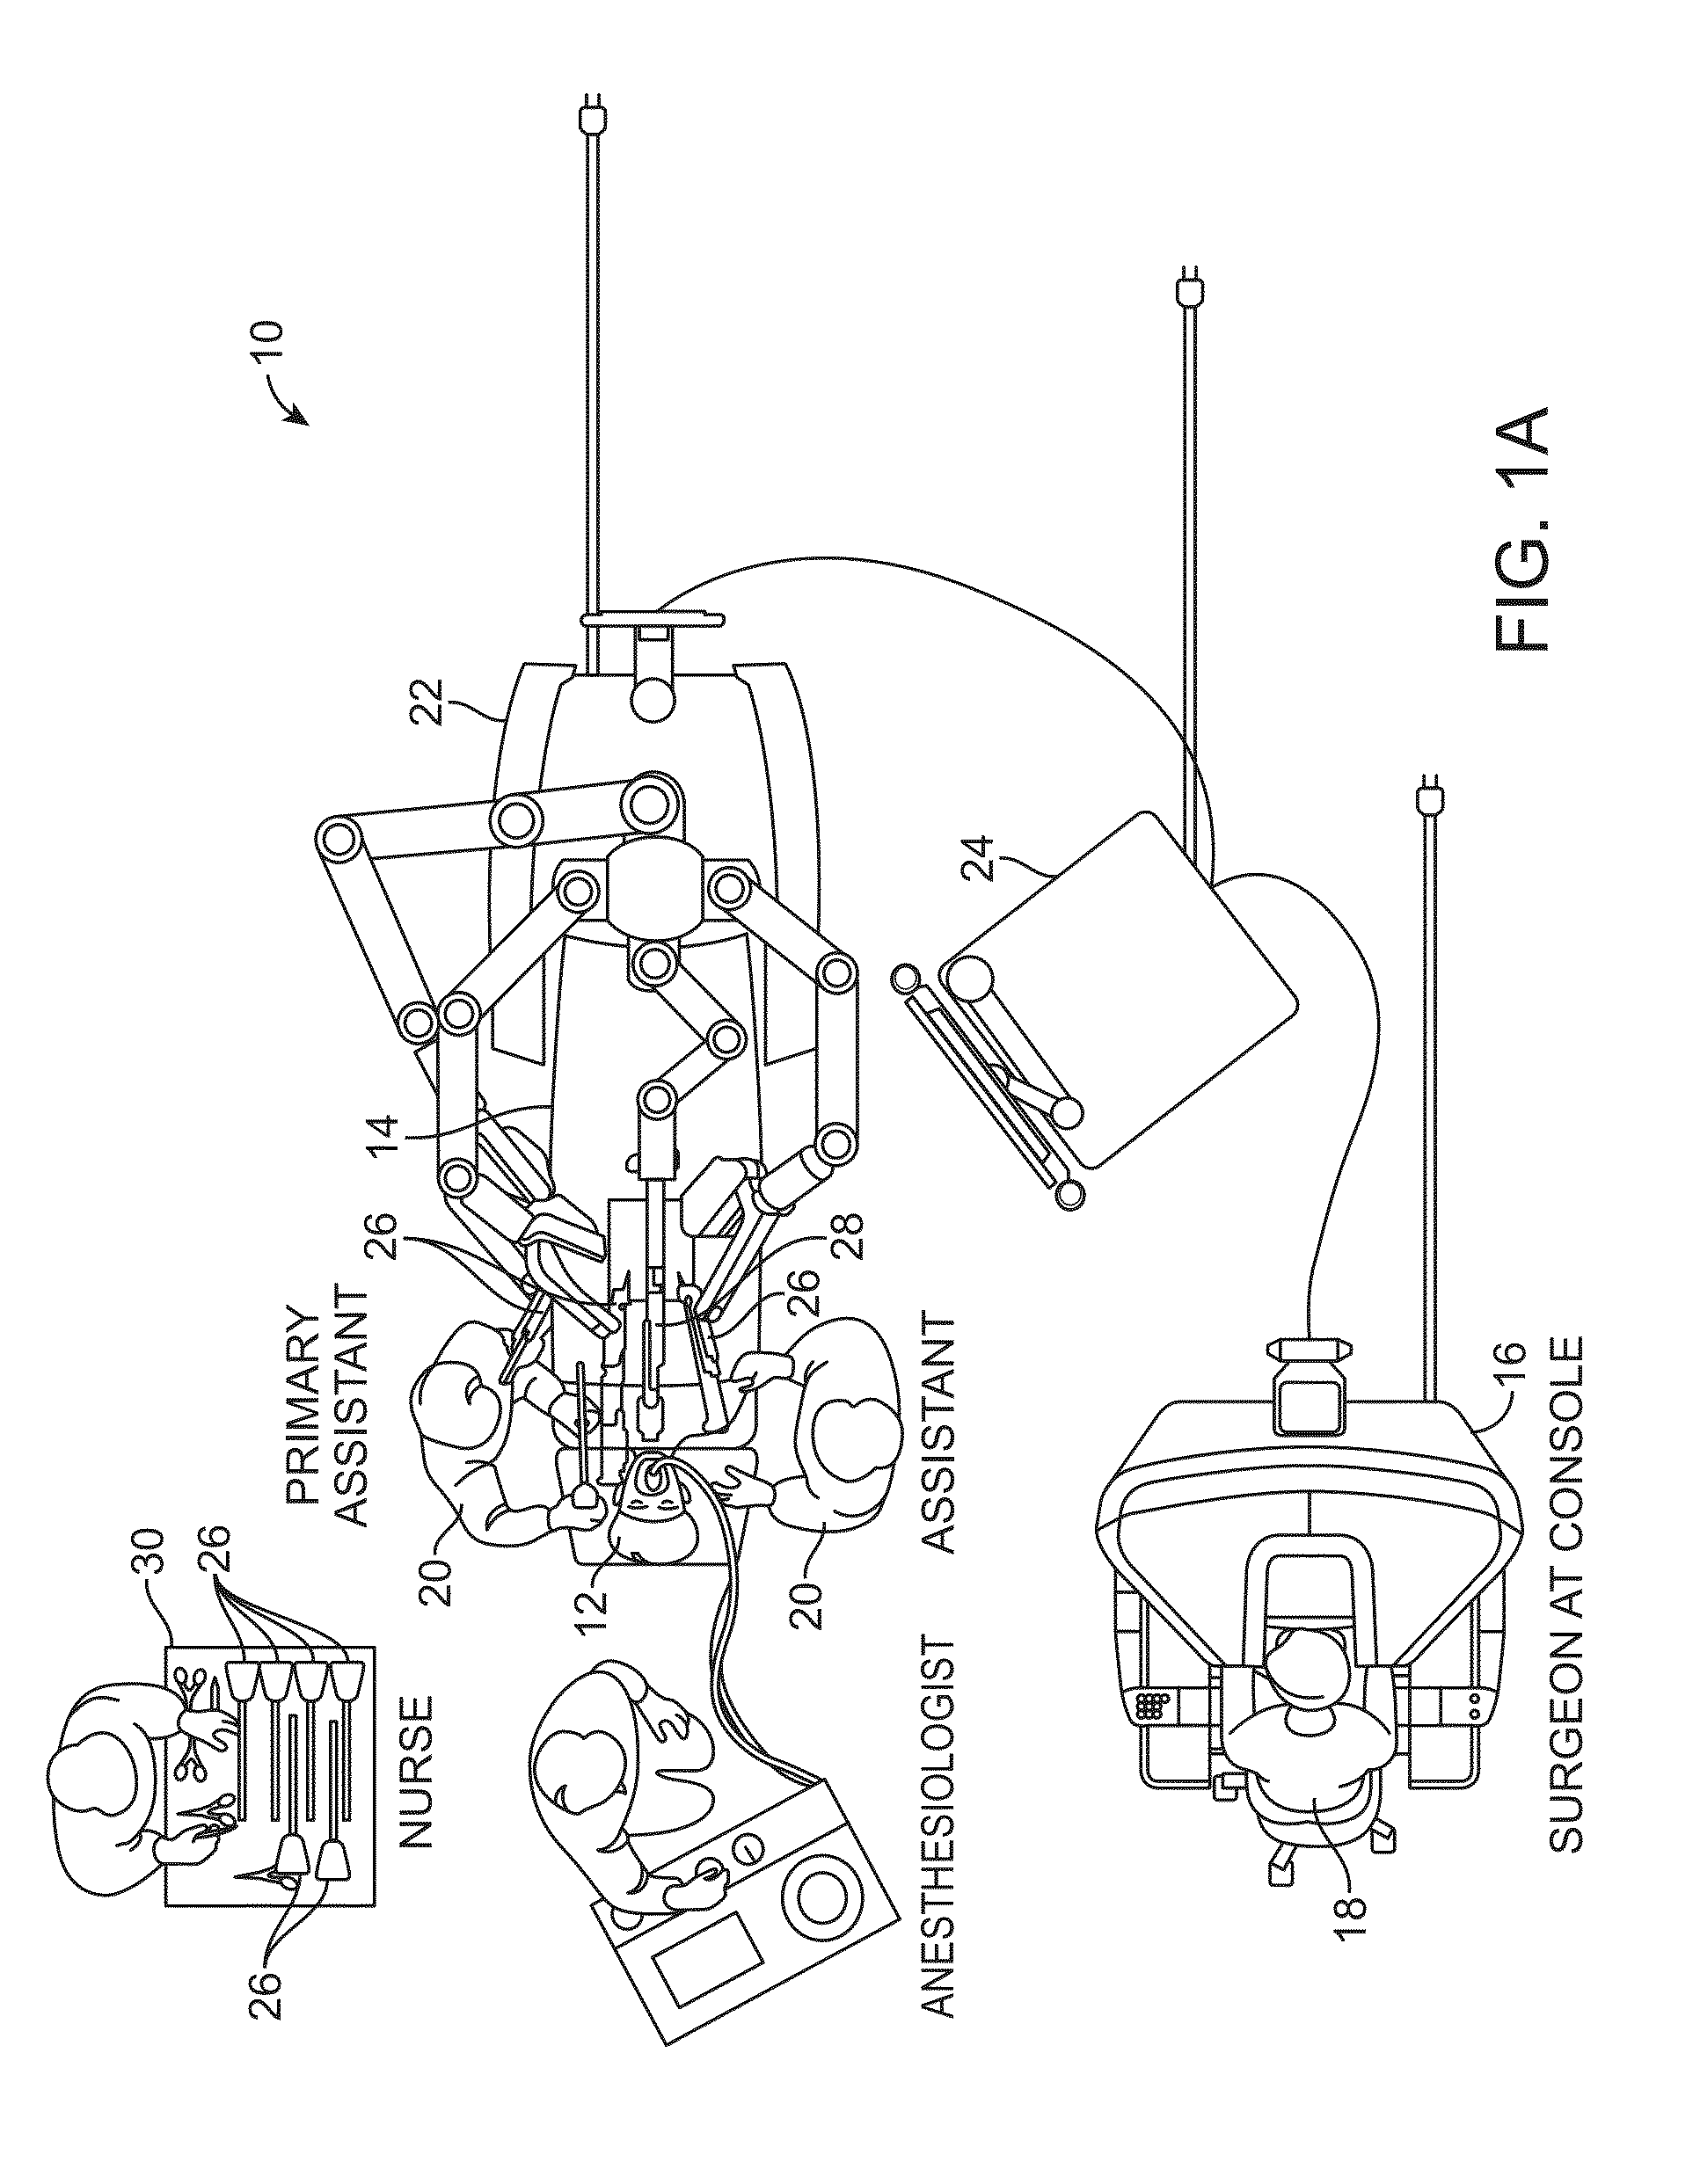 Systems and methods for tracking a path using the null-space